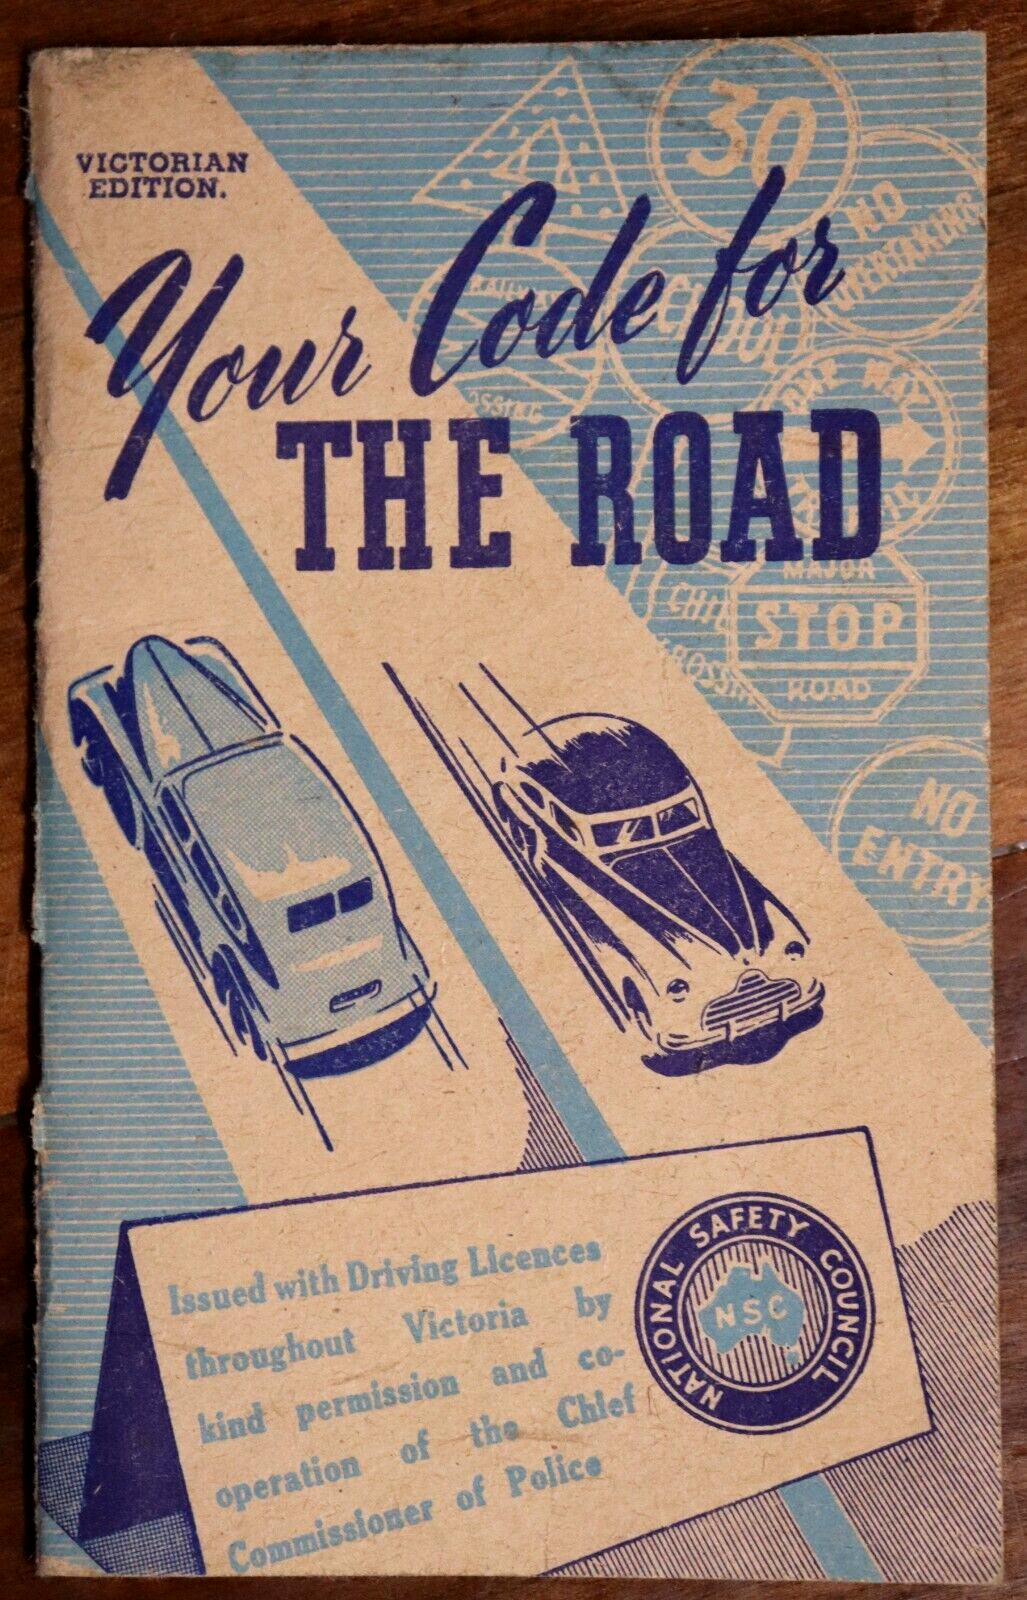 Your Code For The Road: Victorian Ed. - c1948 - Australian Automotive History